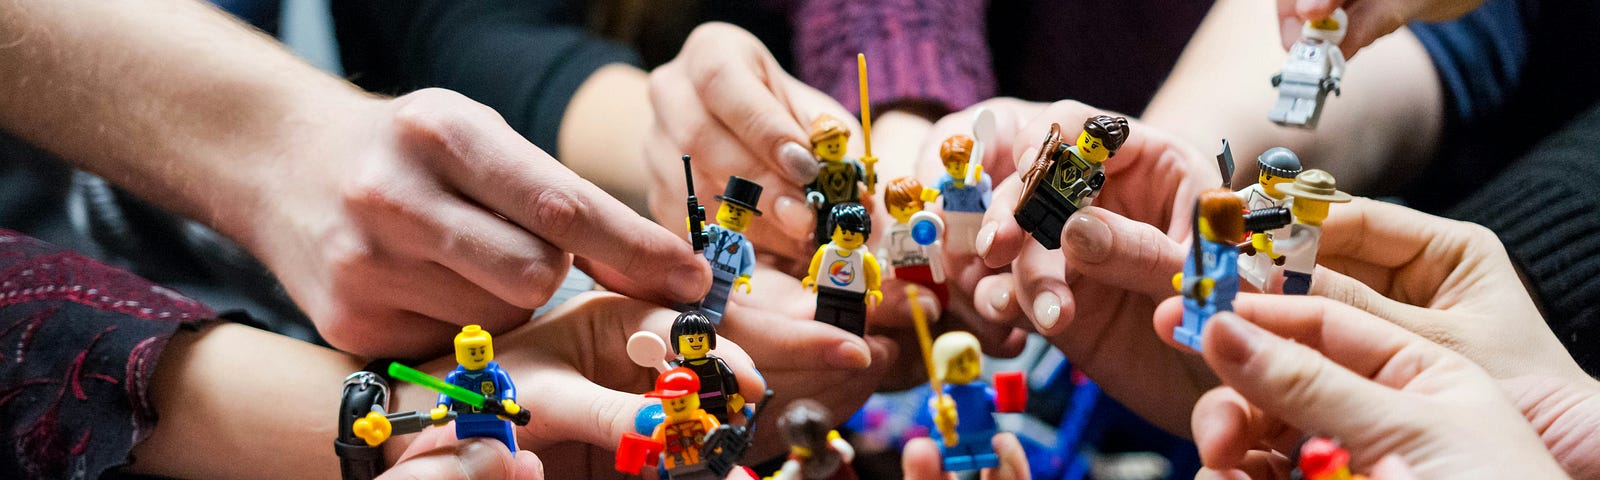 A team is all in with hands in a group holding toy figurines.